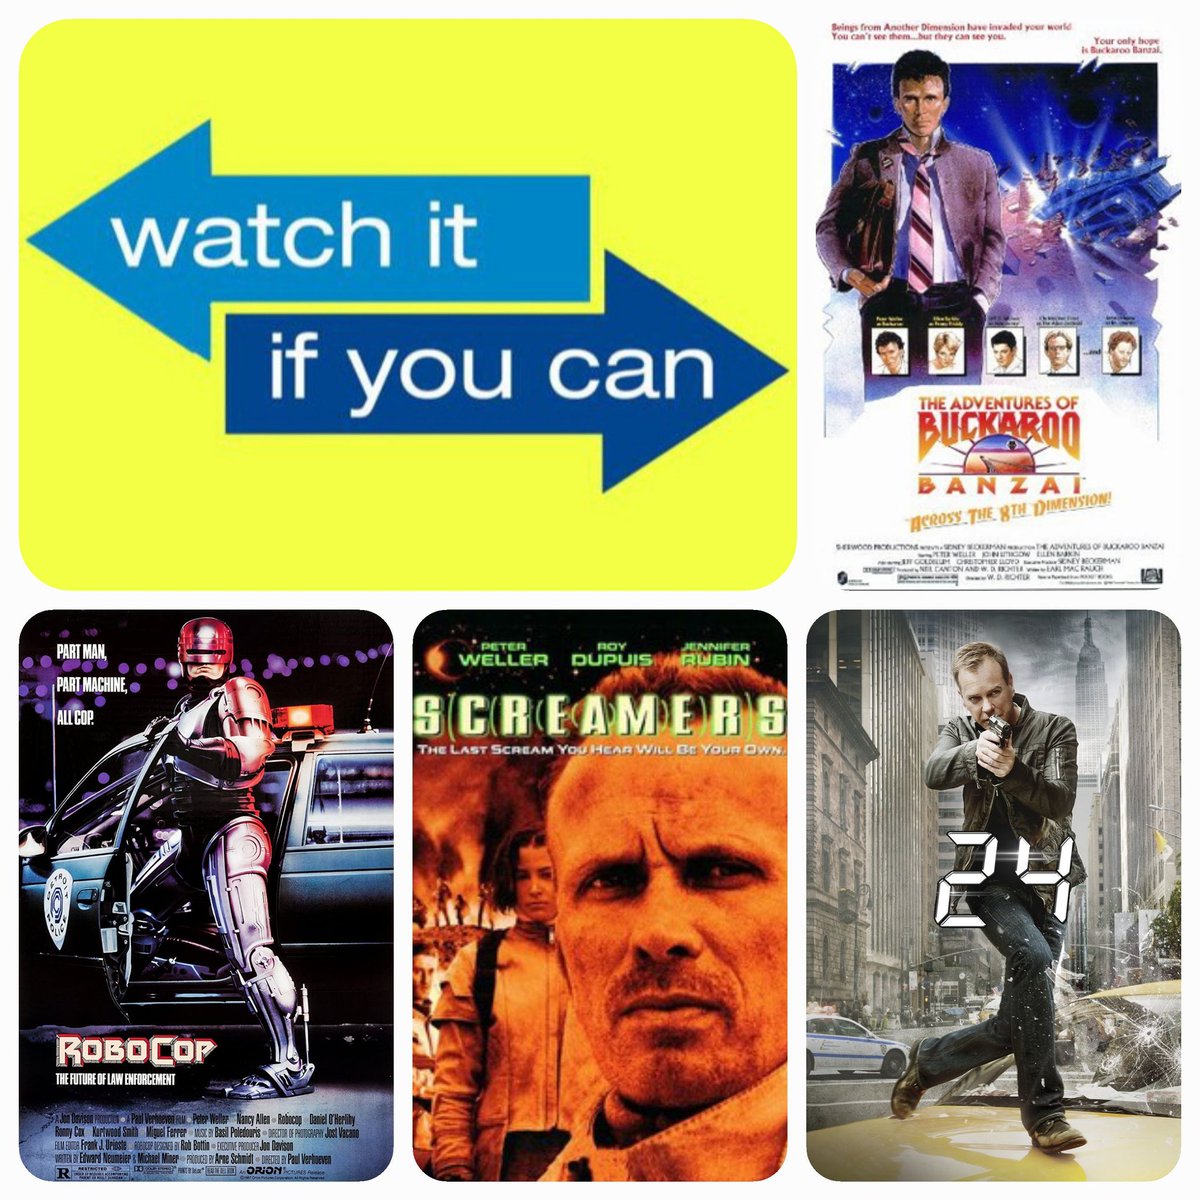 Some of our favourite movies/tv shows featuring Peter Weller.

Any you haven't seen? Then maybe...
just maybe #watchitifyoucan